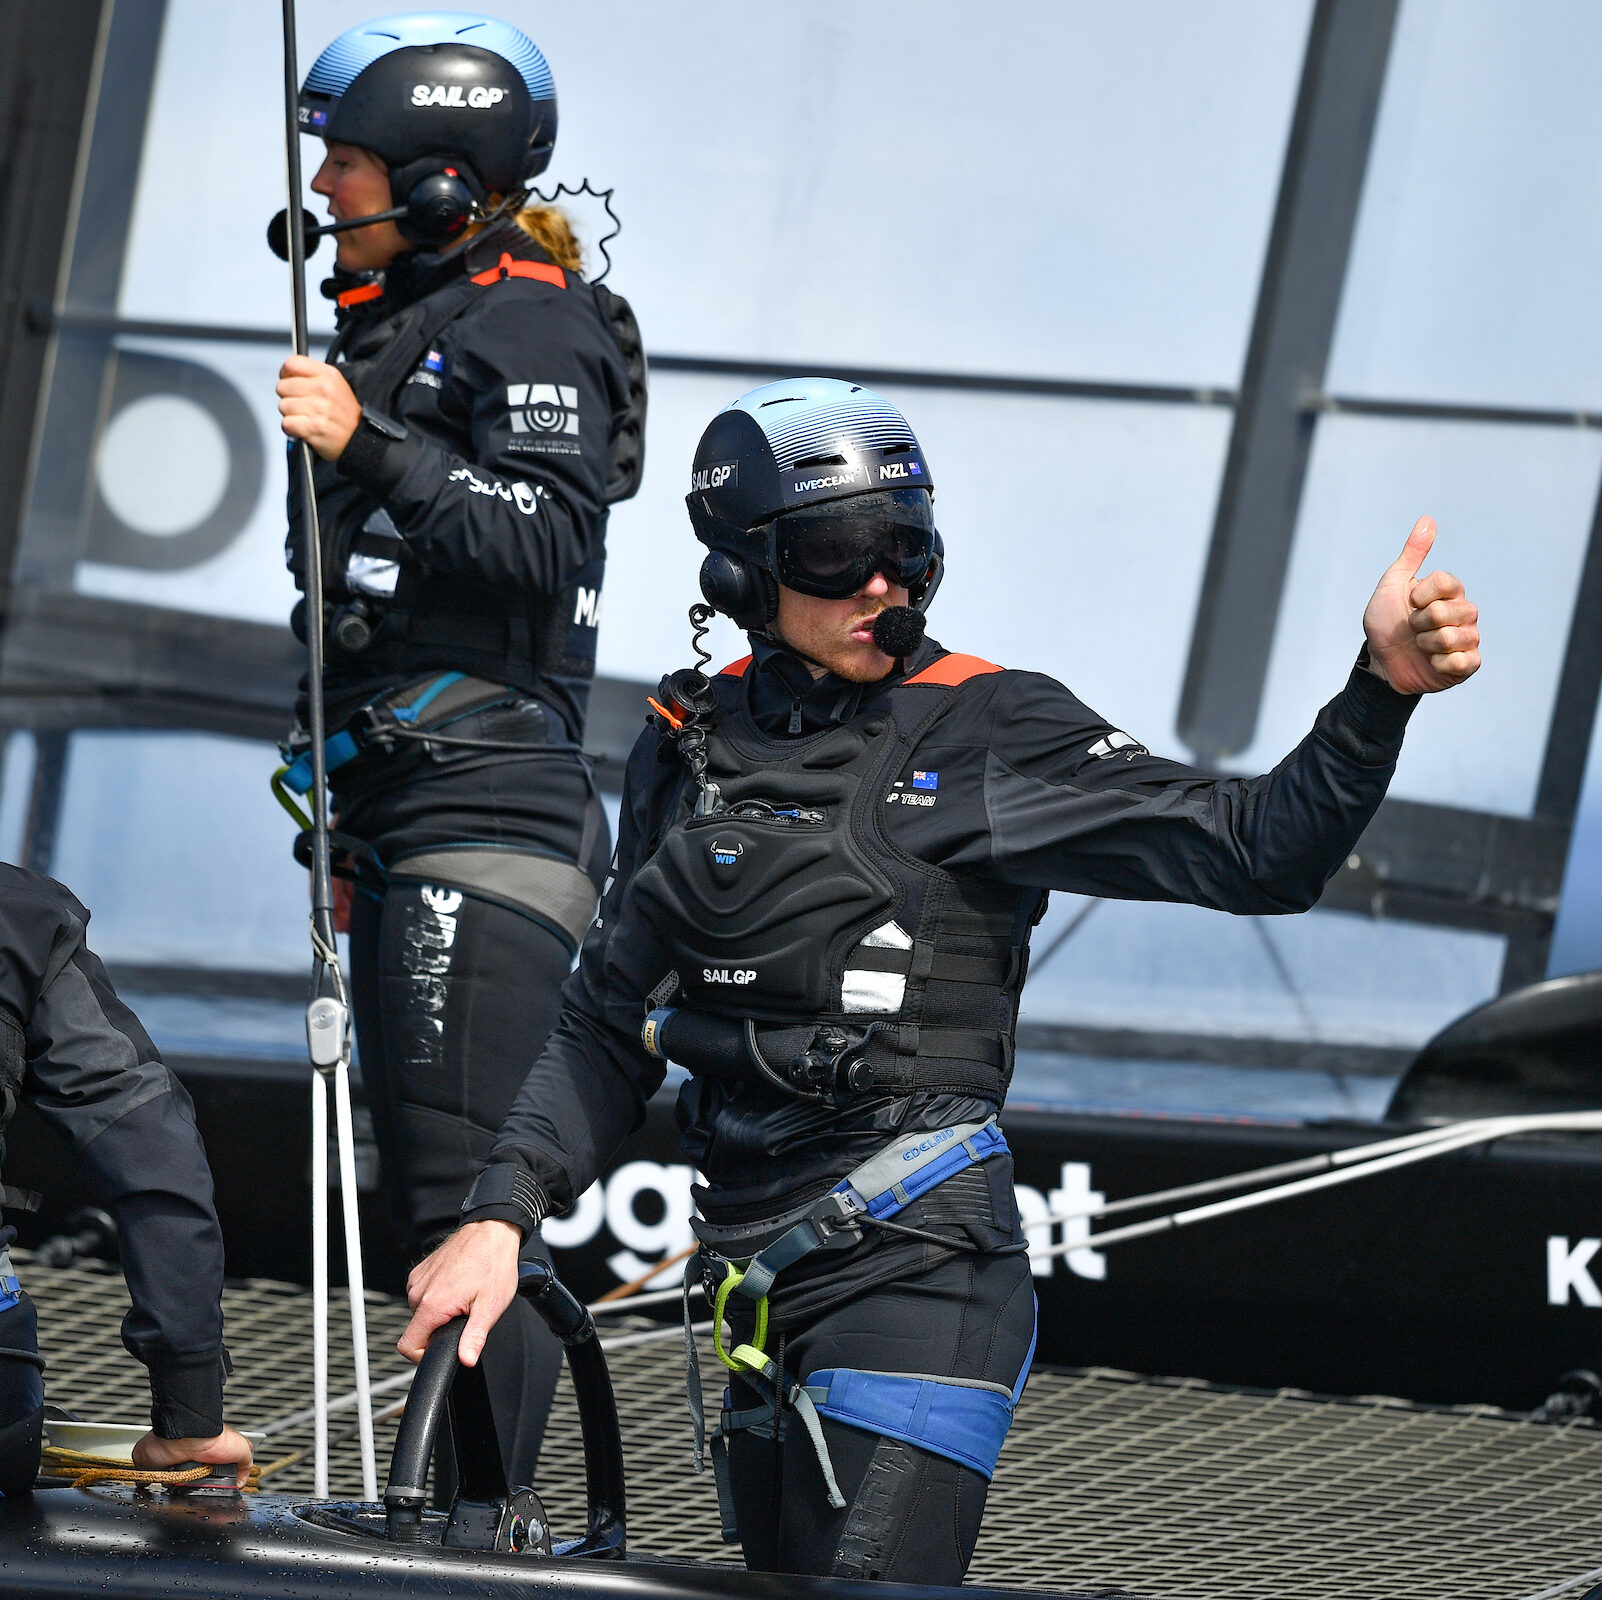 New Zealand SailGP Team in action during a practice session ahead of Denmark SailGP, Event 4, Season 2 in Aarhus, Denmark 17 August 2021. Photo: Ricardo Pinto for SailGP. Handout image supplied by SailGP